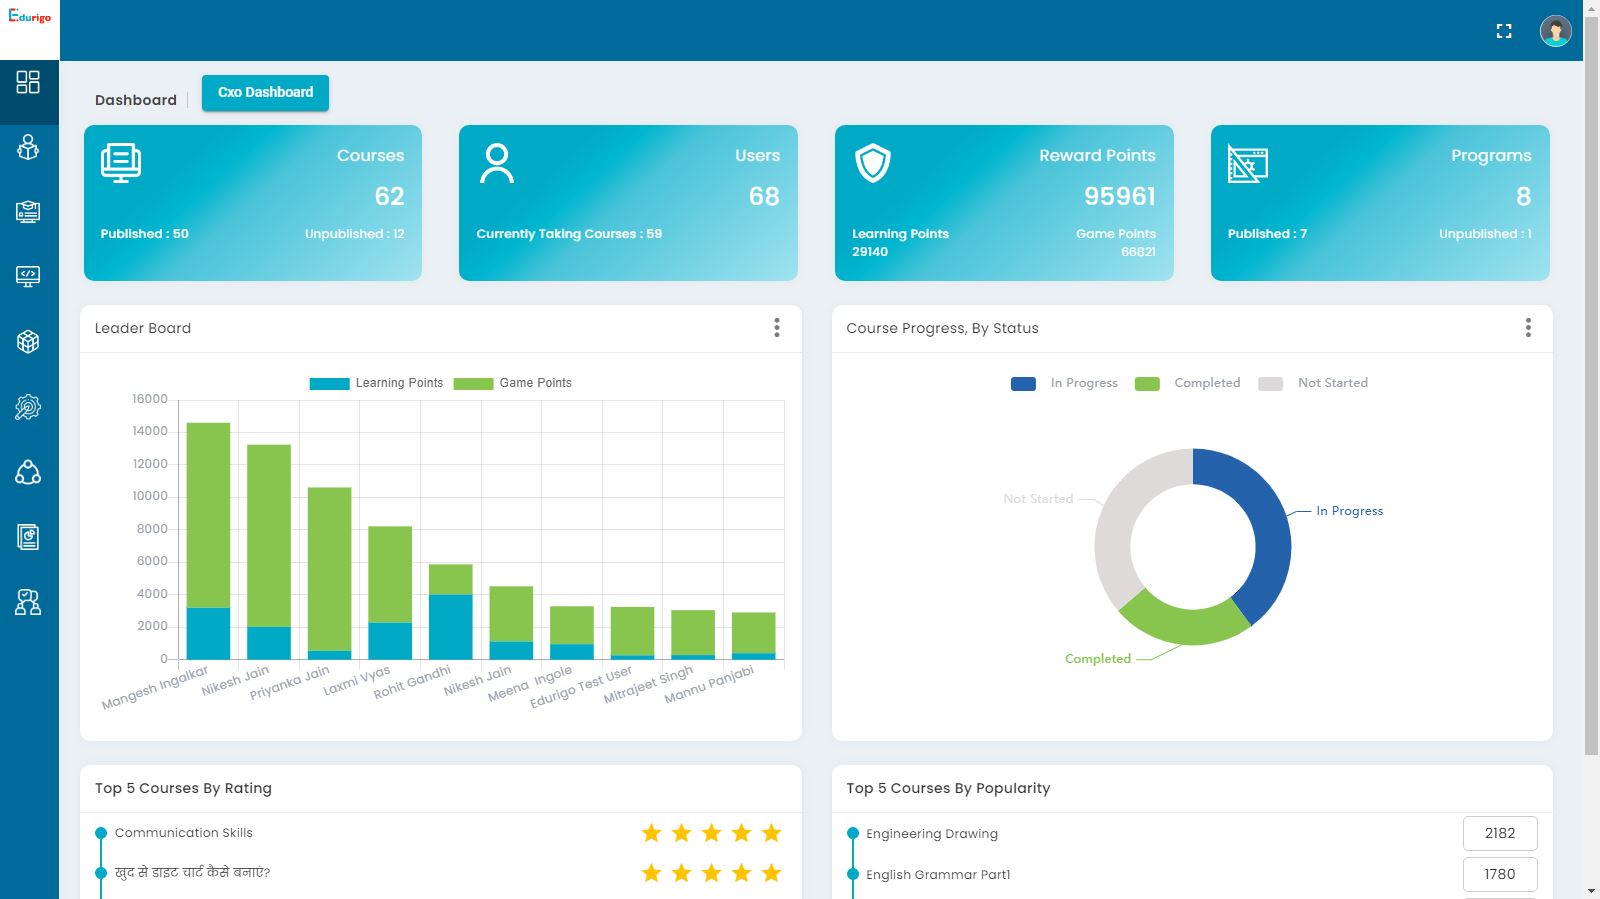 DASHBOARD for ADMINS to provide a quick summary of the USAGE of the system, and to TRACK learning progresses. The C-SUITE DASHBOARD renders executives an overview of the LEARNING INDEXES of the organization